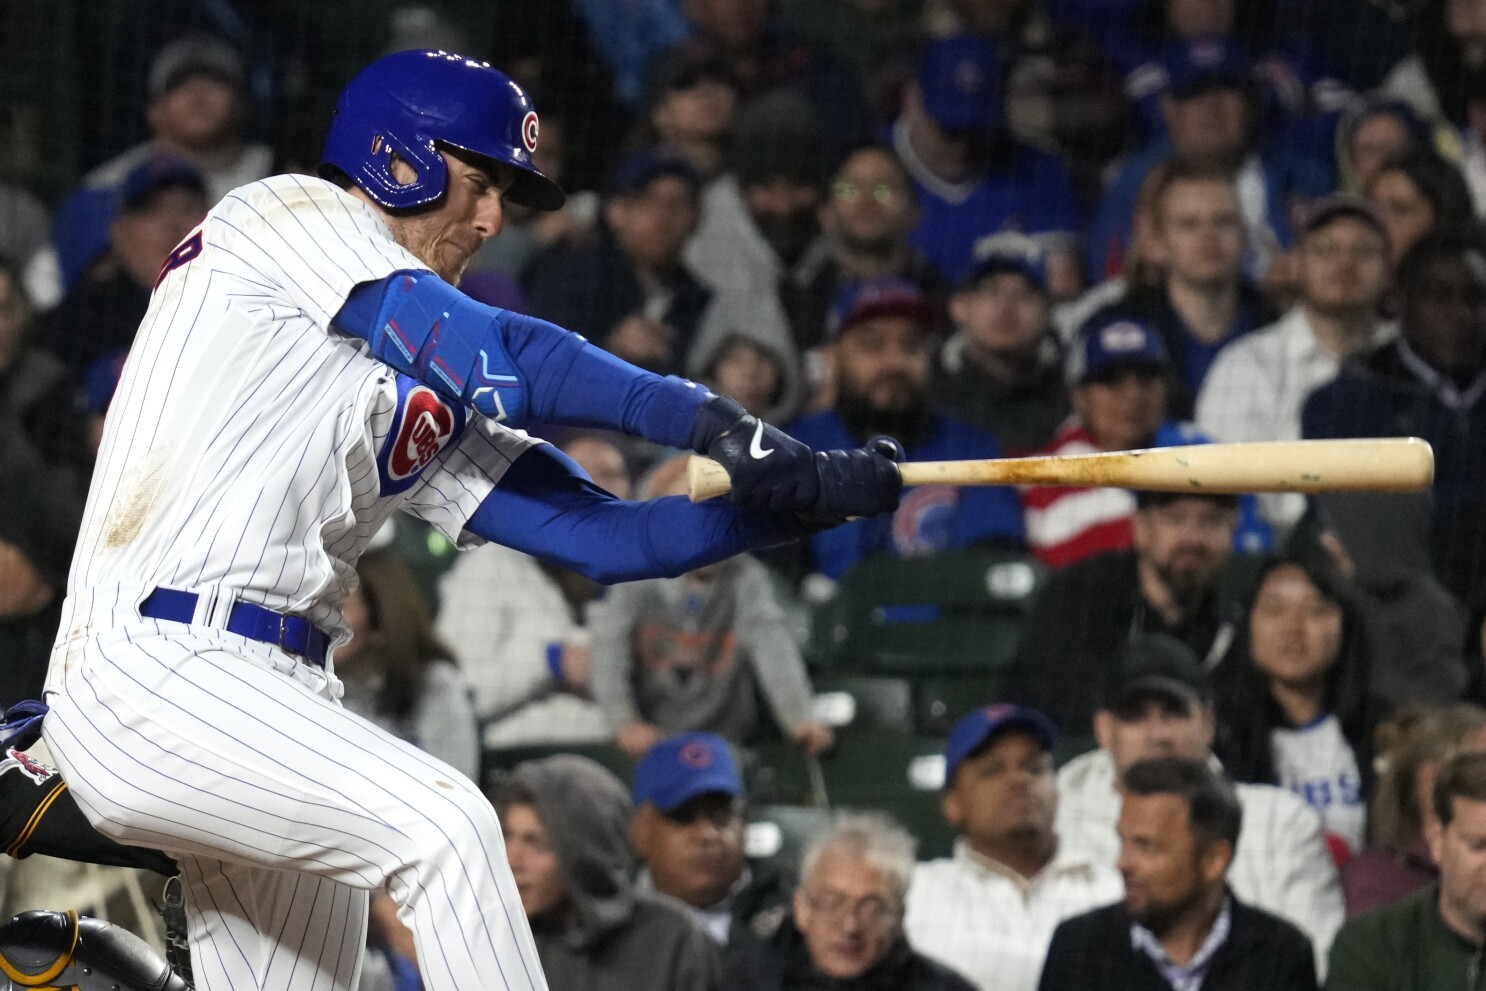 Wisdom hits 25th homer, Cubs pull away from Pirates 8-3 - ABC7 Chicago